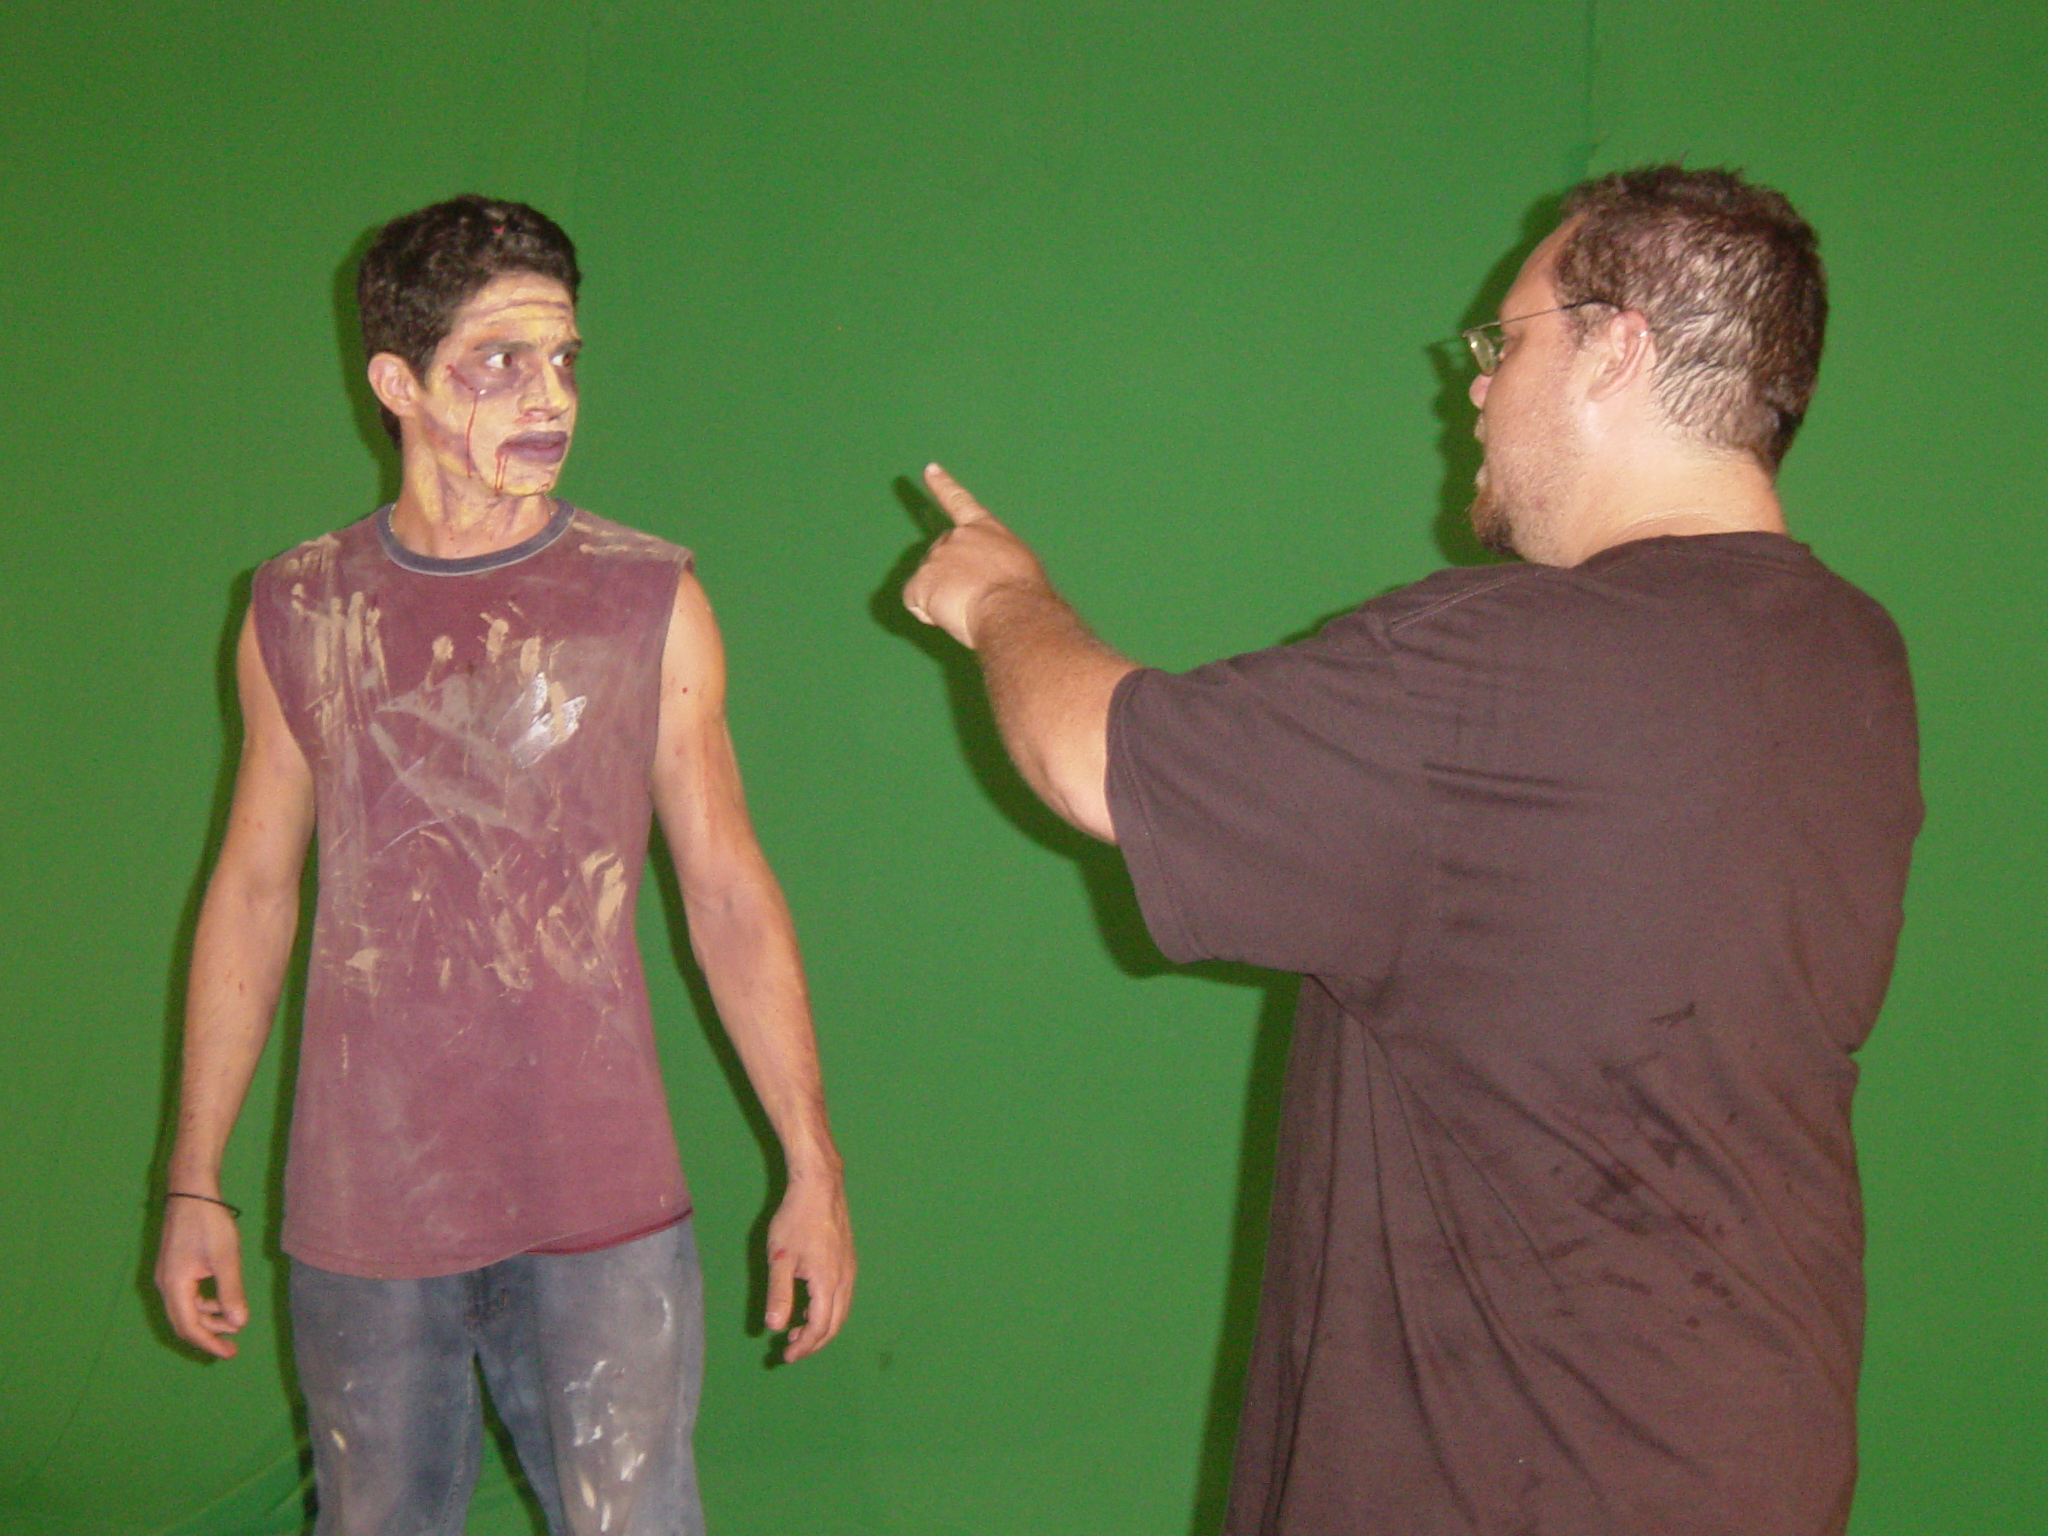 With filmmaker, Vance McLean Ball, directing me as a zombie in the film, Barricada.